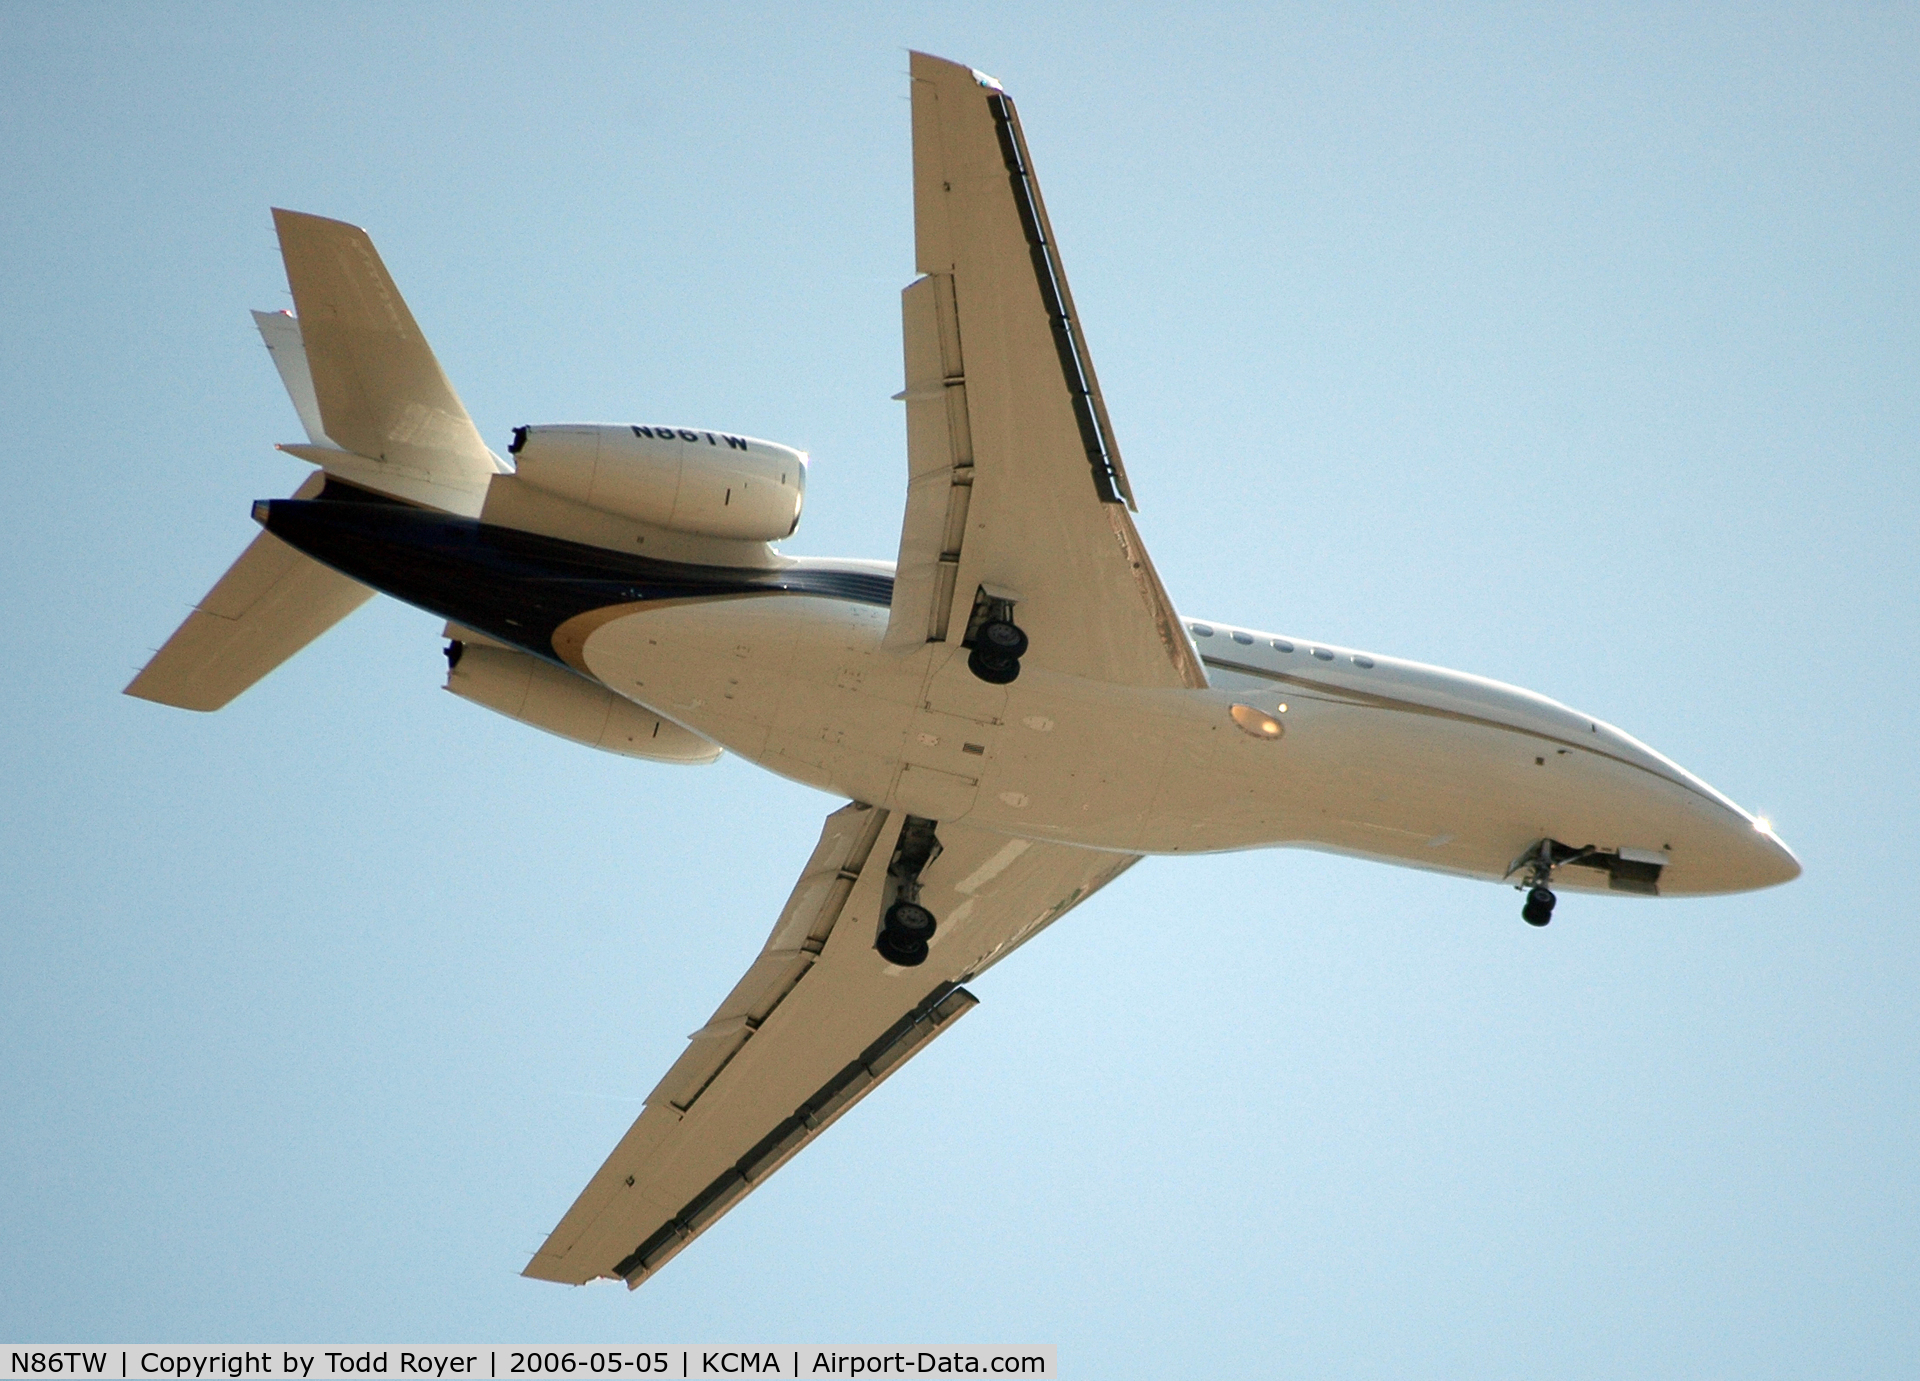 N86TW, Dassault Falcon 2000 C/N 043, From the backyard